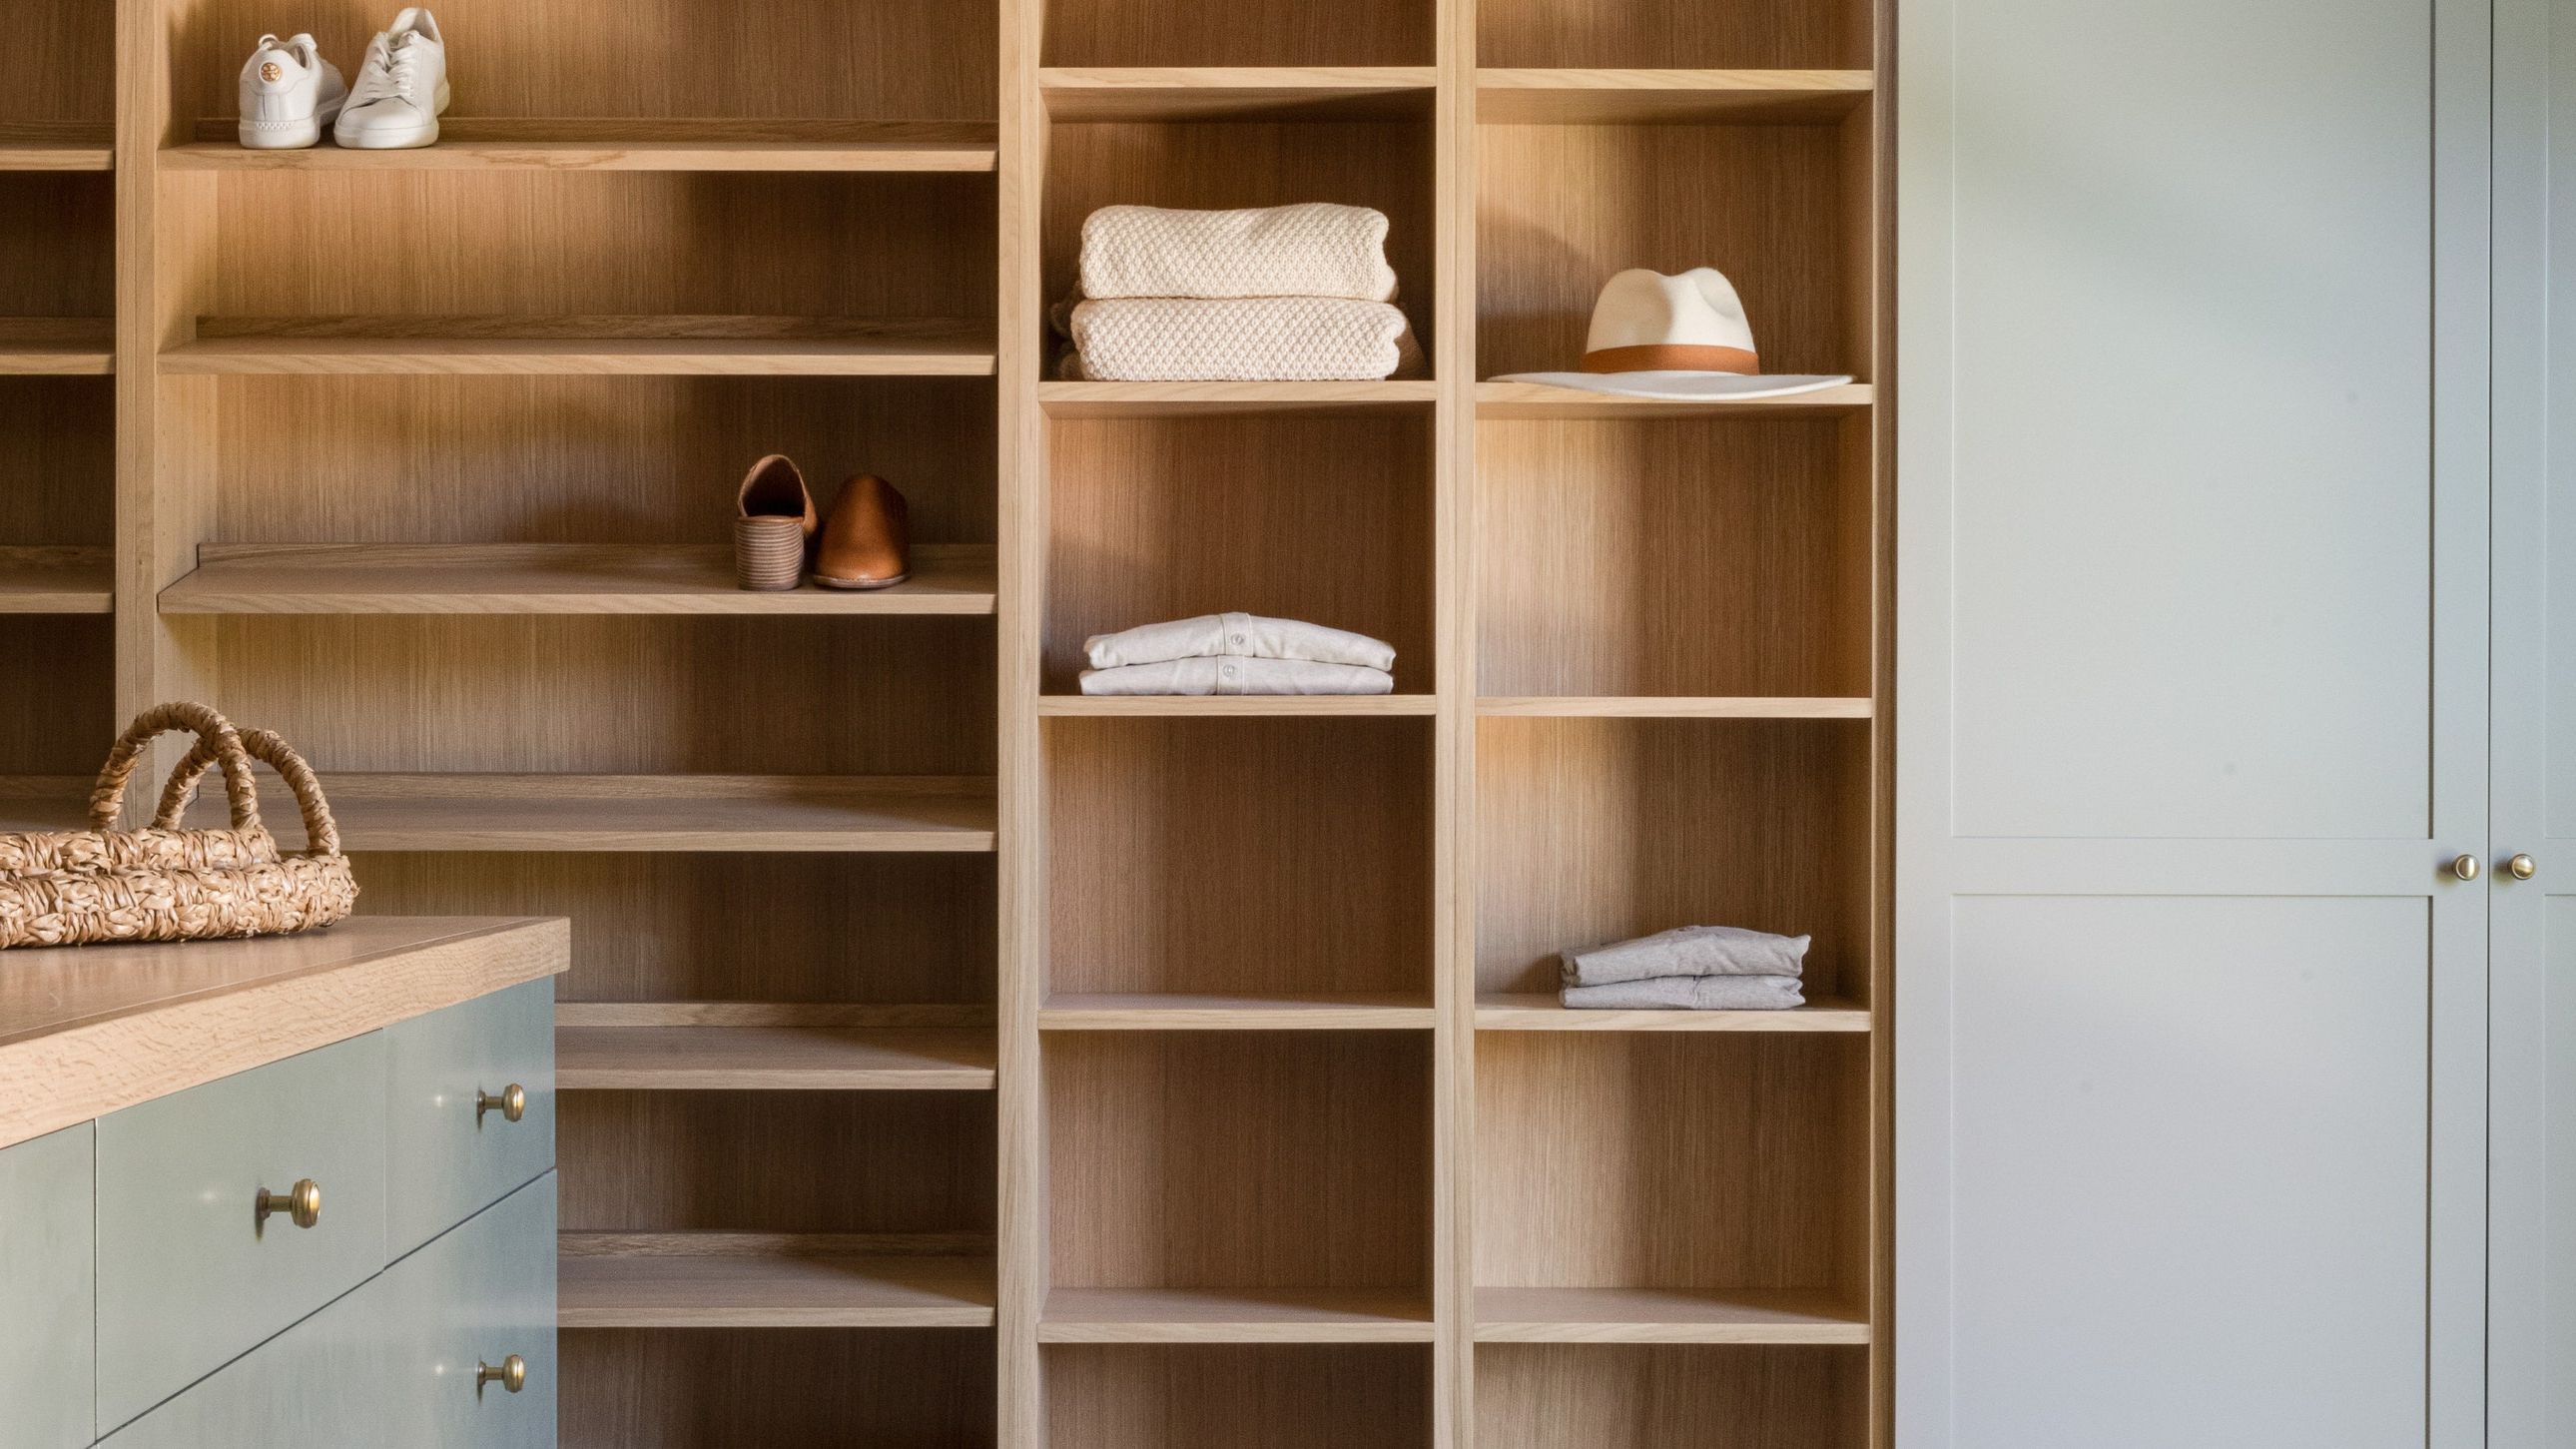 33 Best Closet Organization Ideas To Maximize Space And Style |  Architectural Digest | Architectural Digest With Regard To Drawers And Shelves For Wardrobes (View 14 of 20)